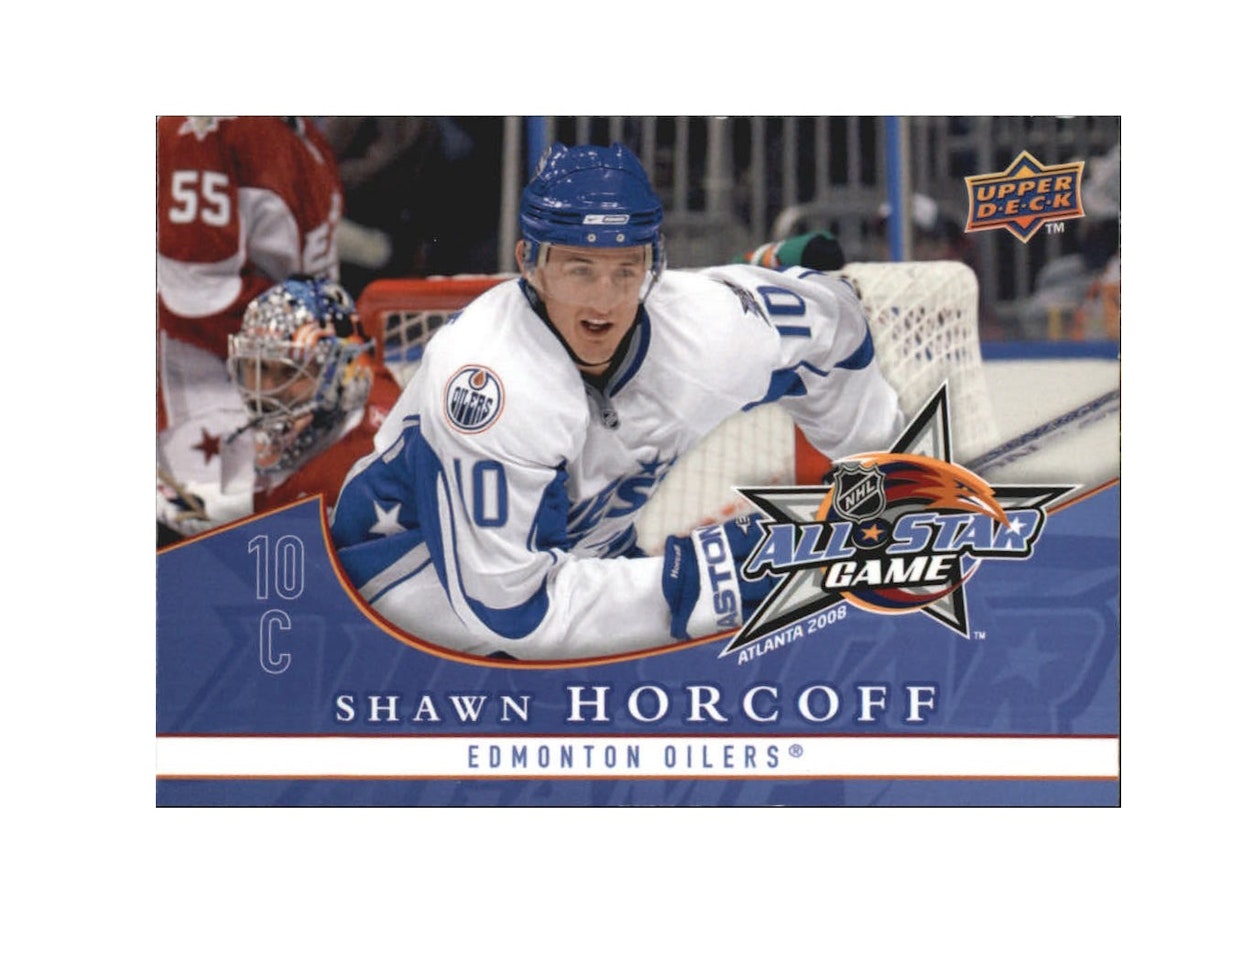 2008-09 Upper Deck All-Stars #AS10 Shawn Horcoff (10-X110-OILERS)